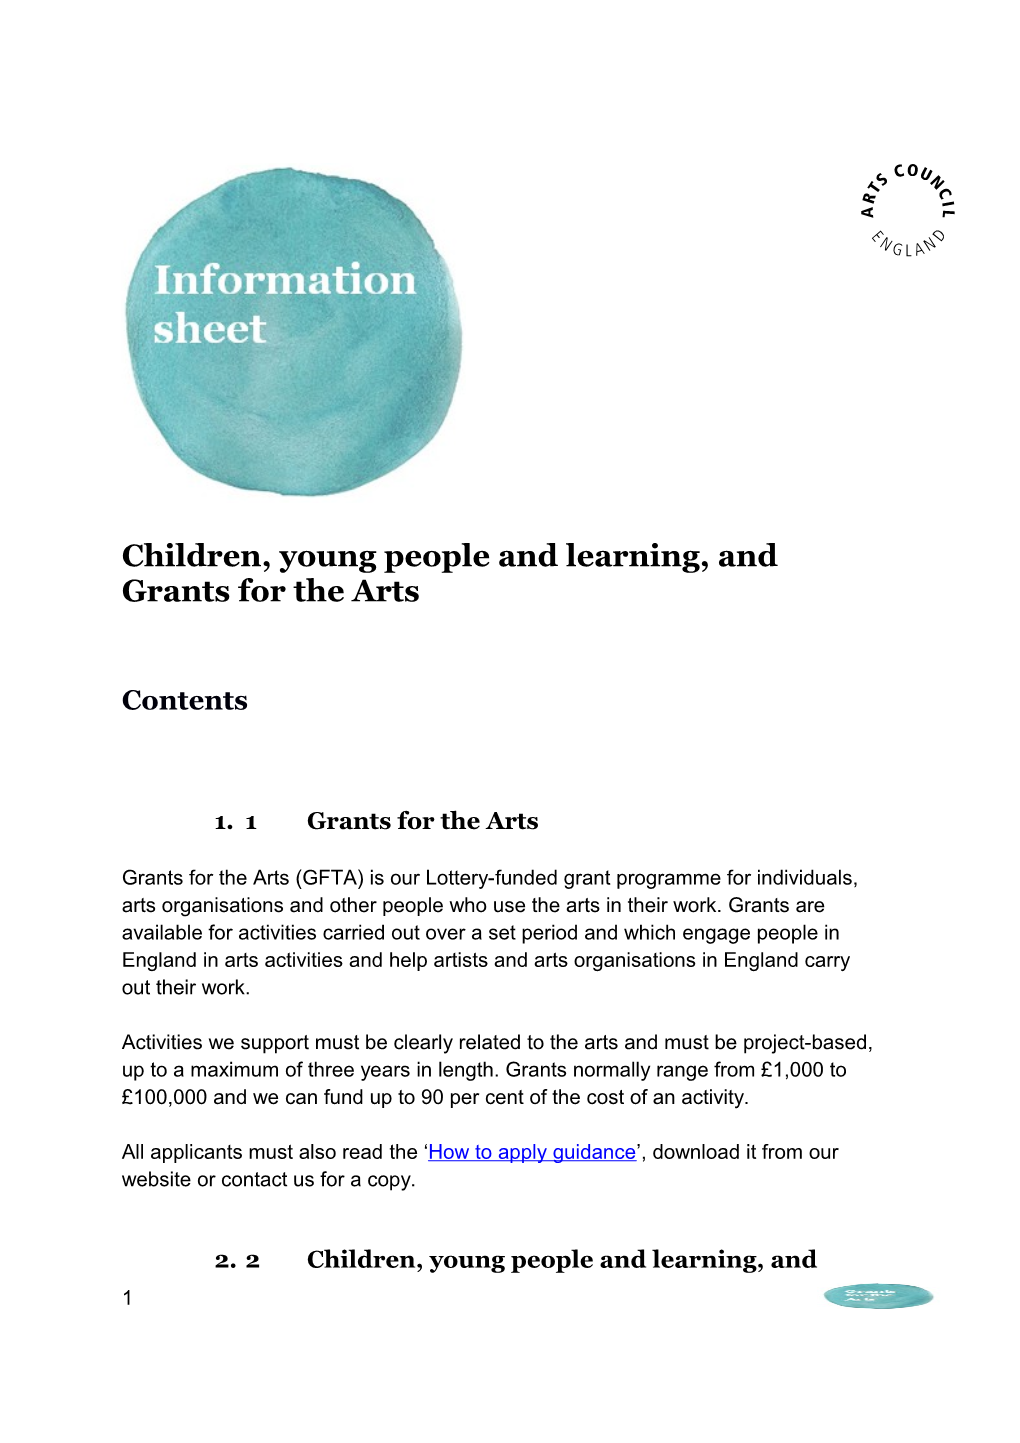 Children, Young People and Learning, and Grants for the Arts